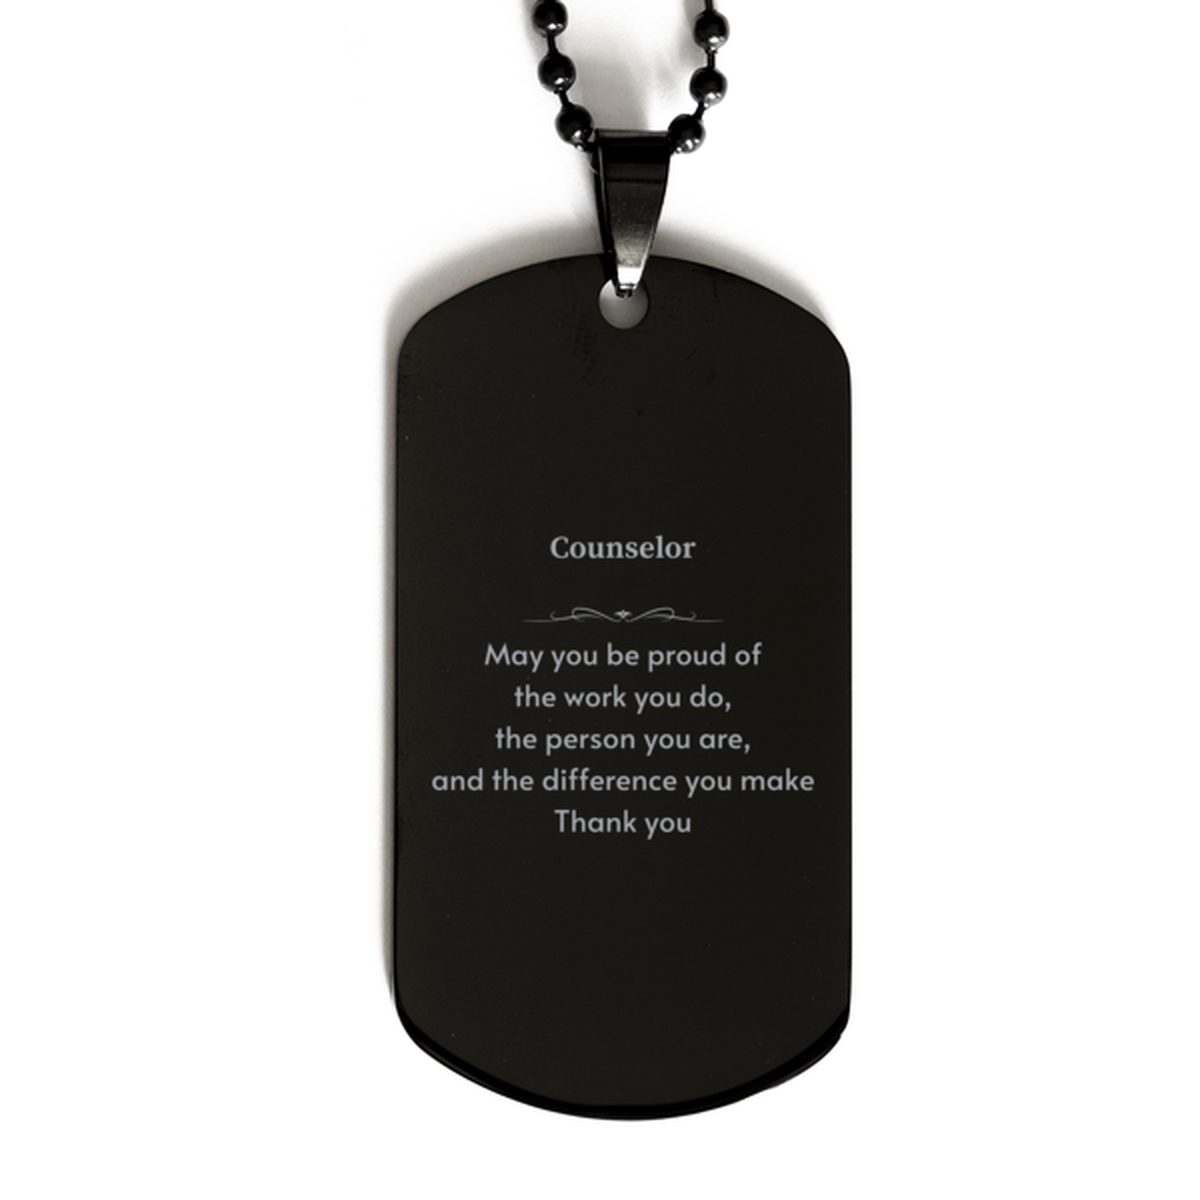 Heartwarming Black Dog Tag Retirement Coworkers Gifts for Counselor, Counselor May You be proud of the work you do, the person you are Gifts for Boss Men Women Friends